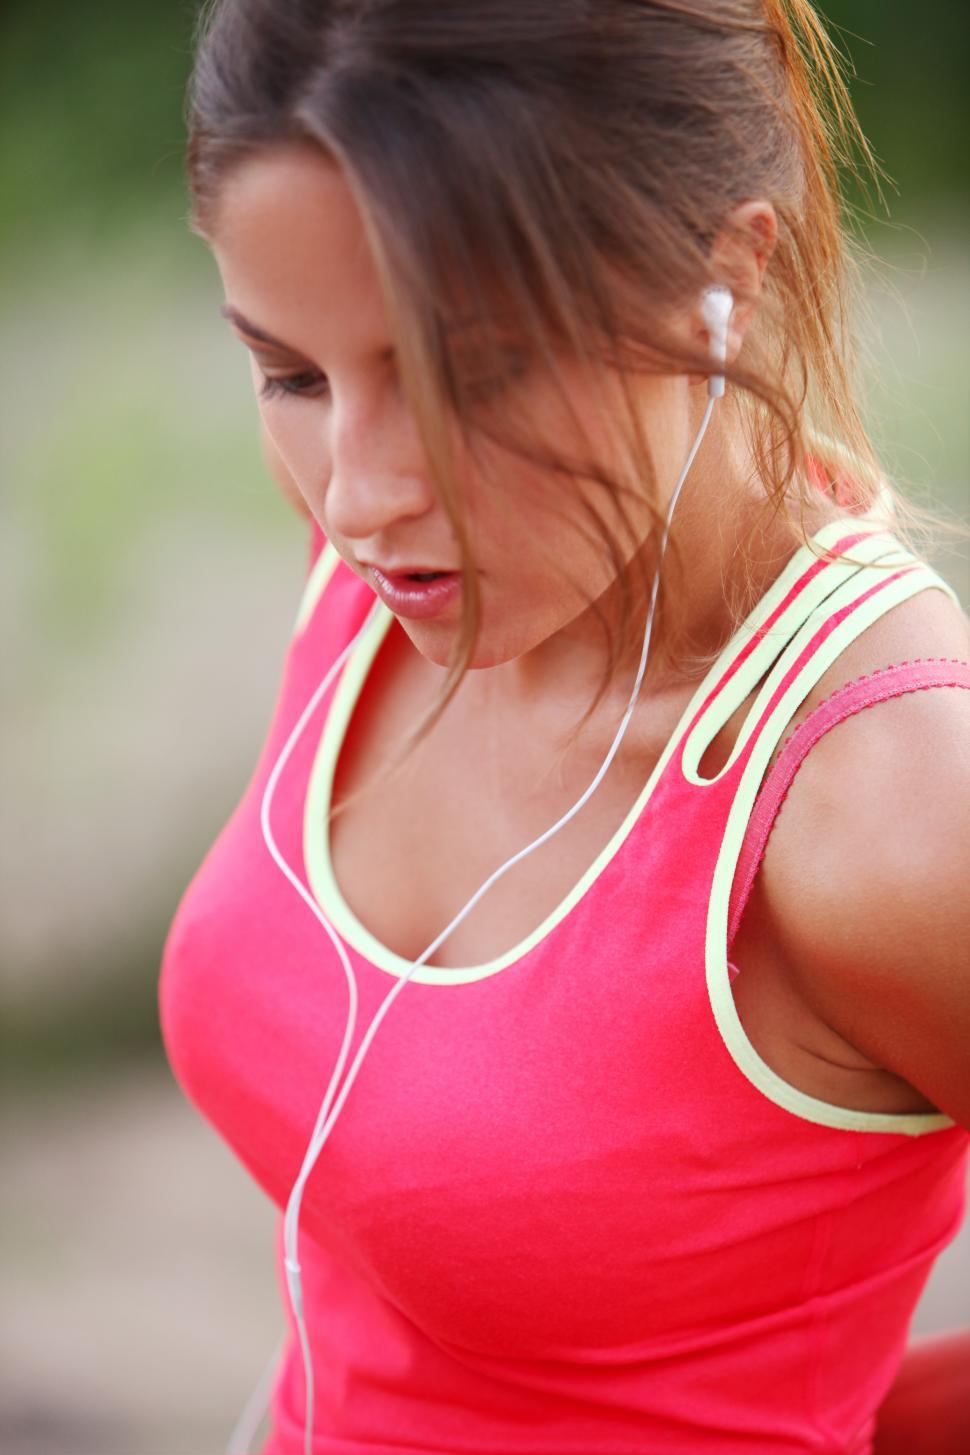 Download Free Stock Photo of Beautiful fitness girl with headphones 